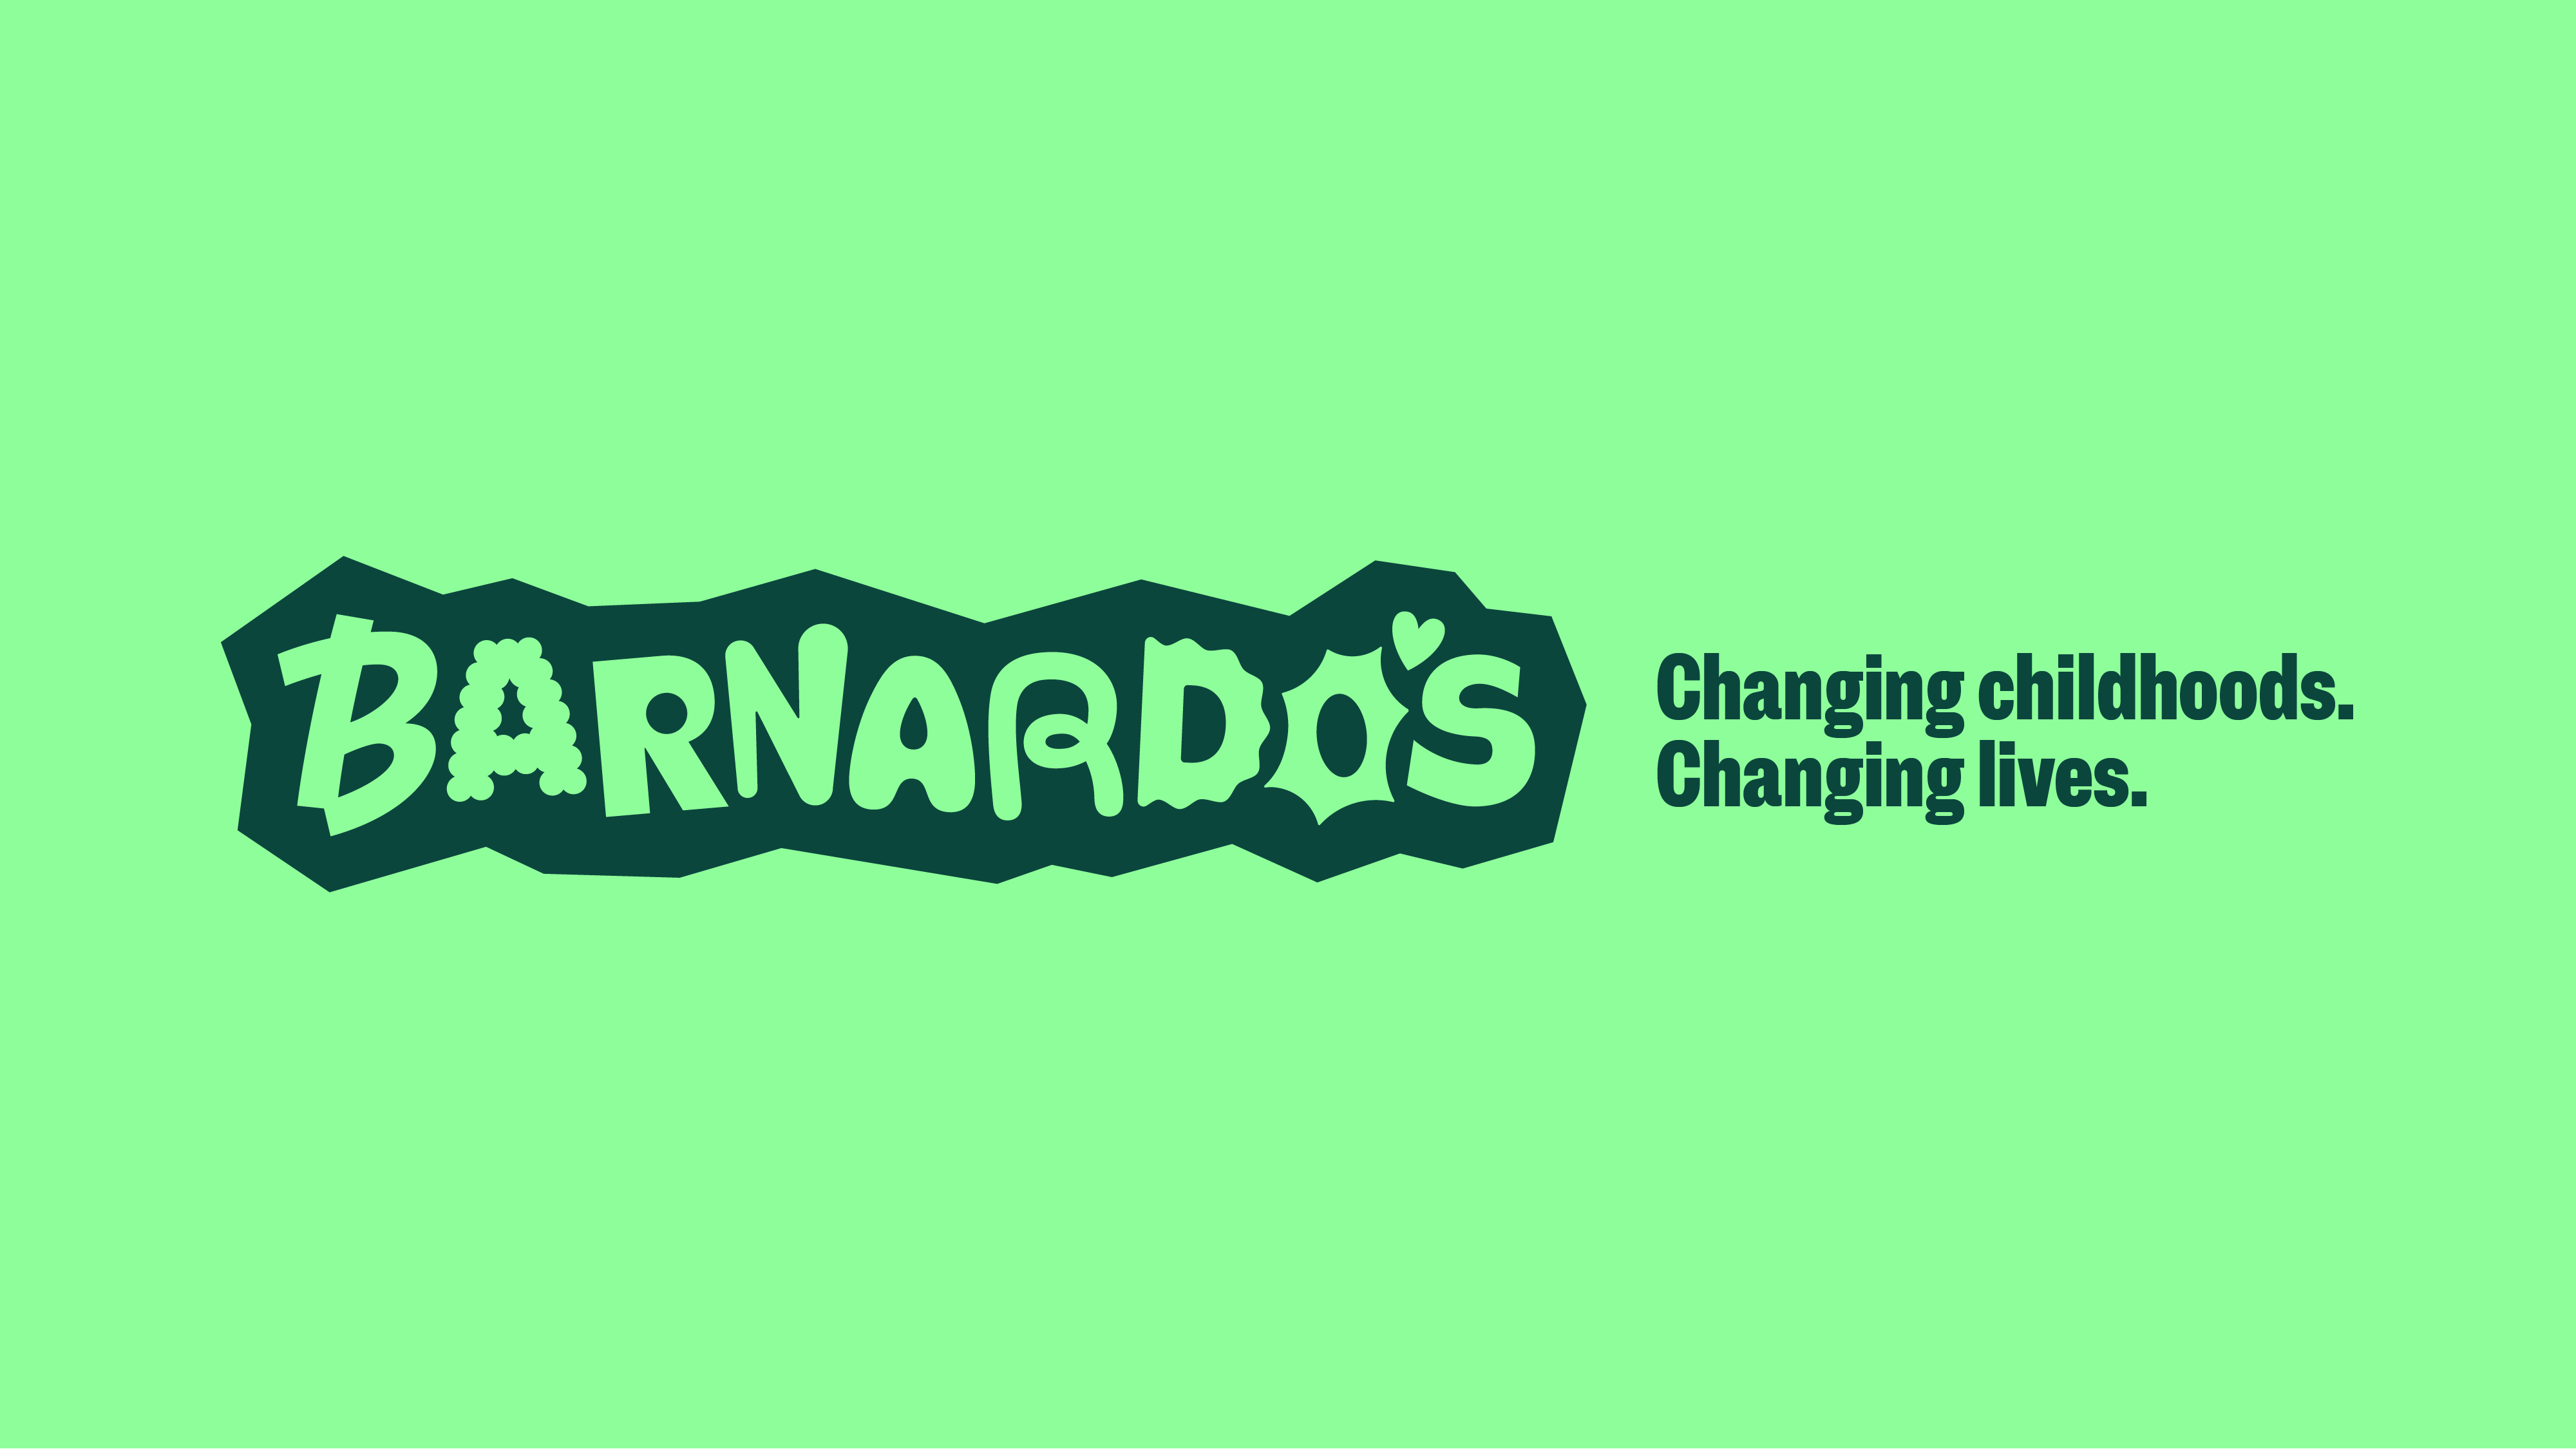 Barnardo's 'Changing Childhoods, Changing Lives' Logo, letters are different shapes to represent different emotions, designed by the children and young people we work with. Light green rectangle background, purpose statement in dark green writing and Barnardo's word in light green surrounded by dark green shadow.